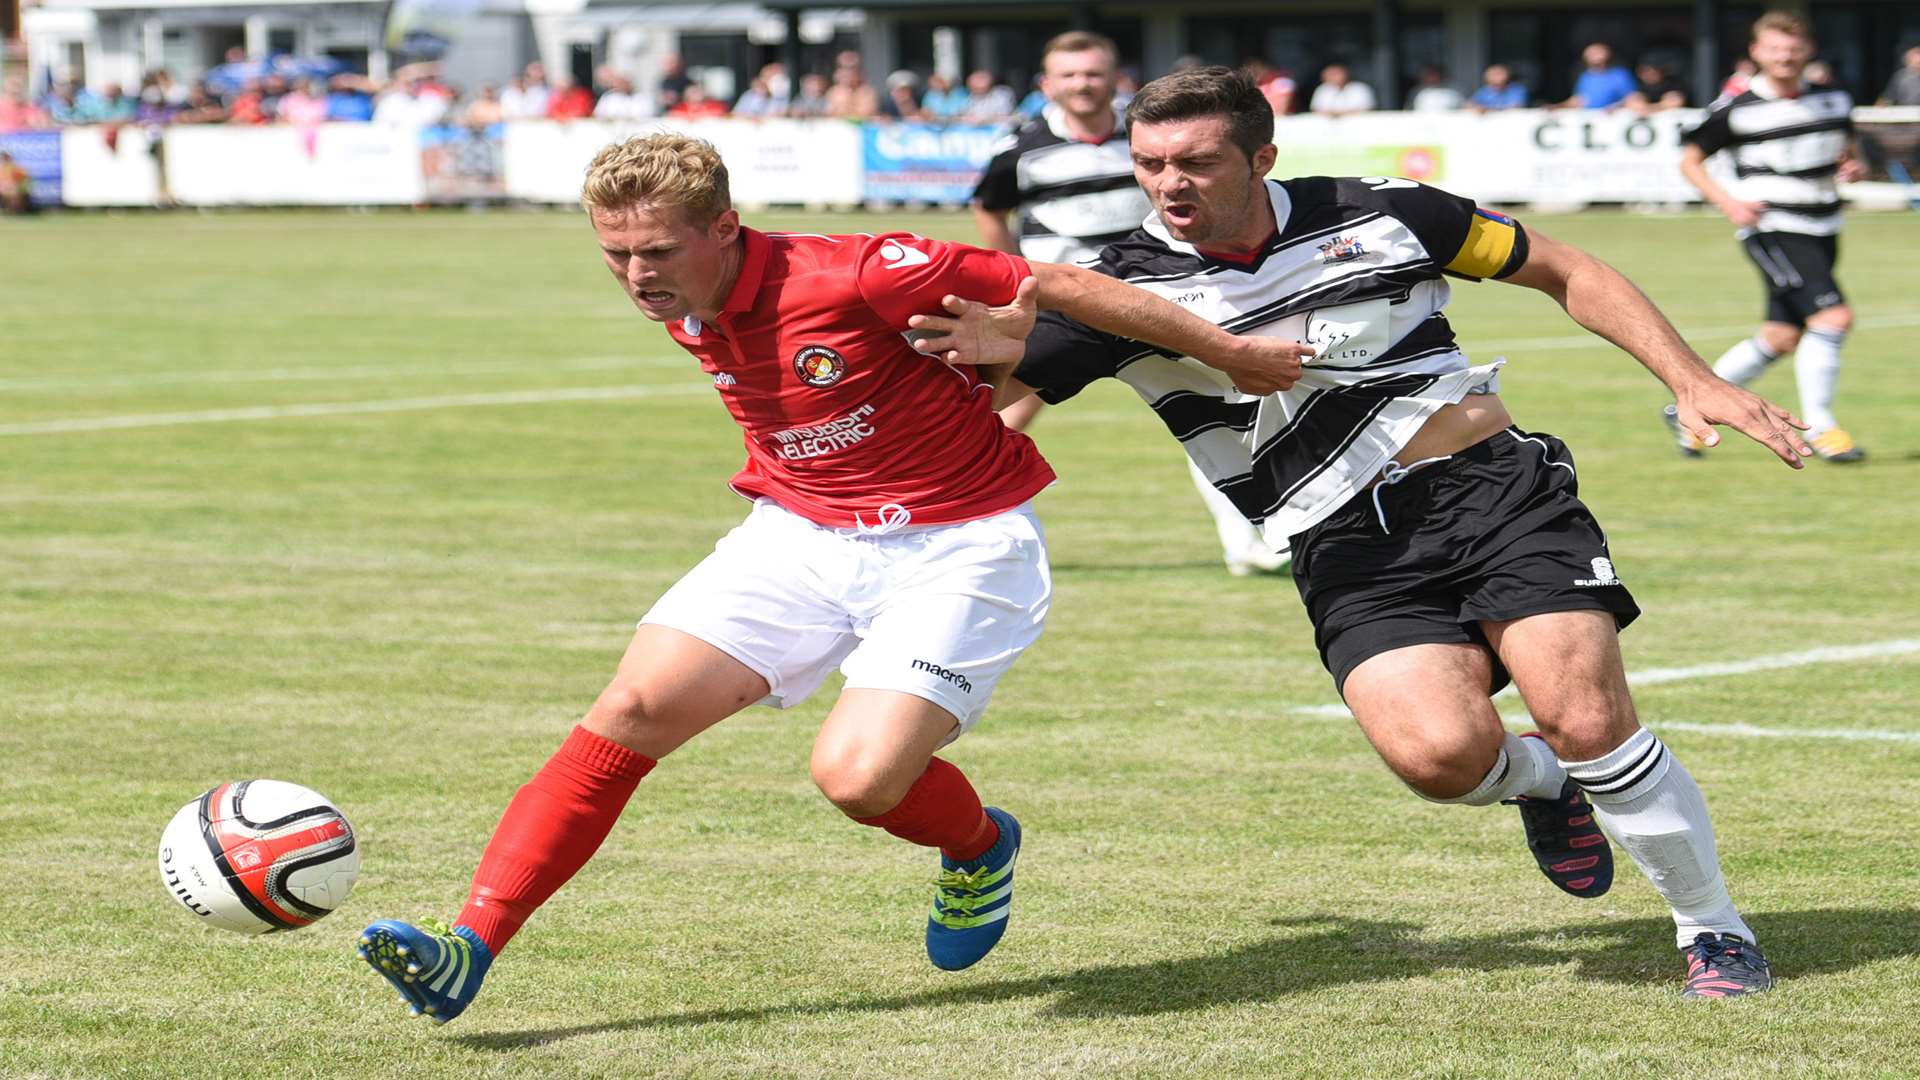 Jordan Parkes on the ball during Ebbsfleet's pre-season friendly at Deal Town Picture: Alan Langley